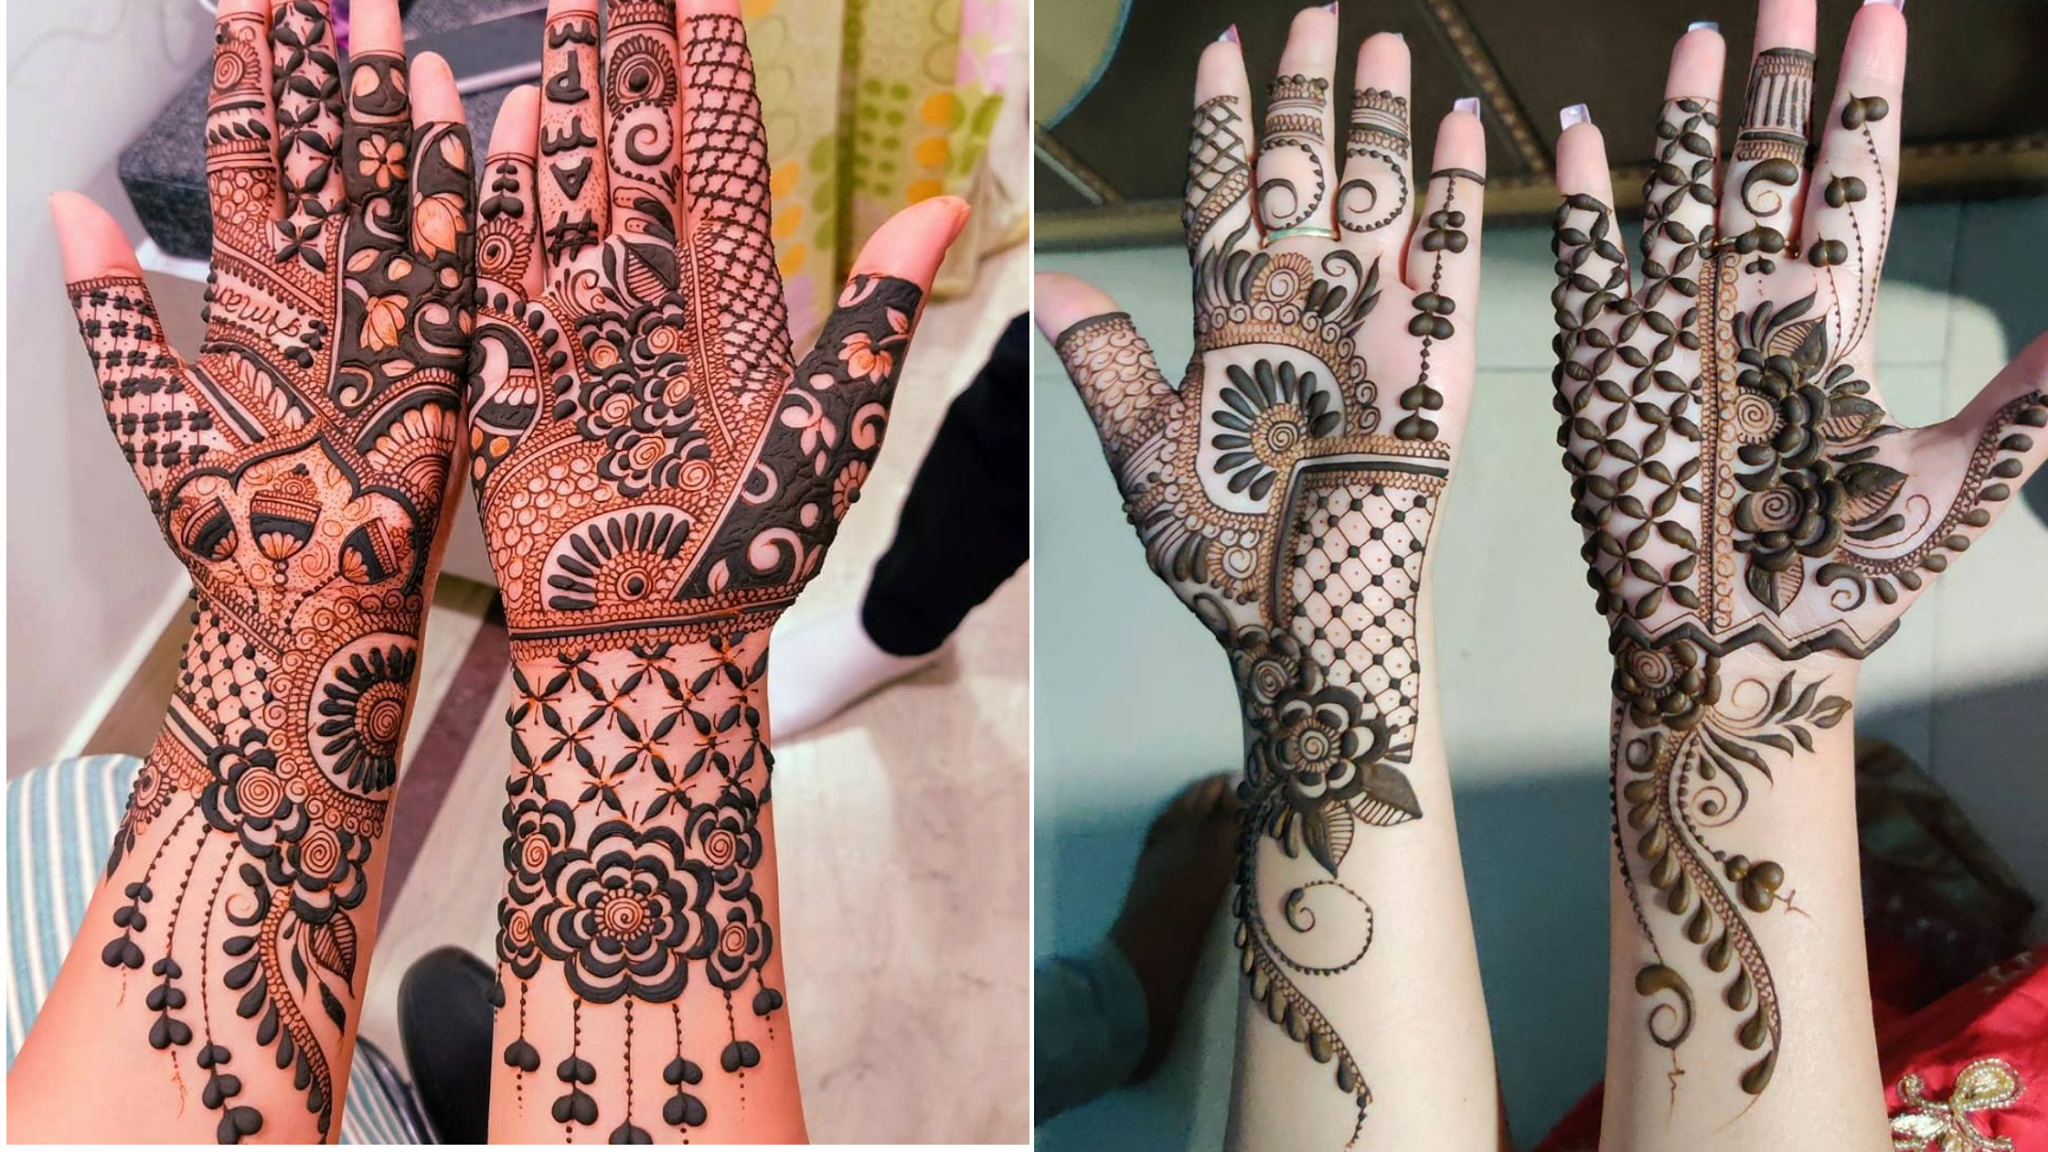 125 Front Hand Mehndi Design Ideas To Fall In Love With! - Wedbook-omiya.com.vn